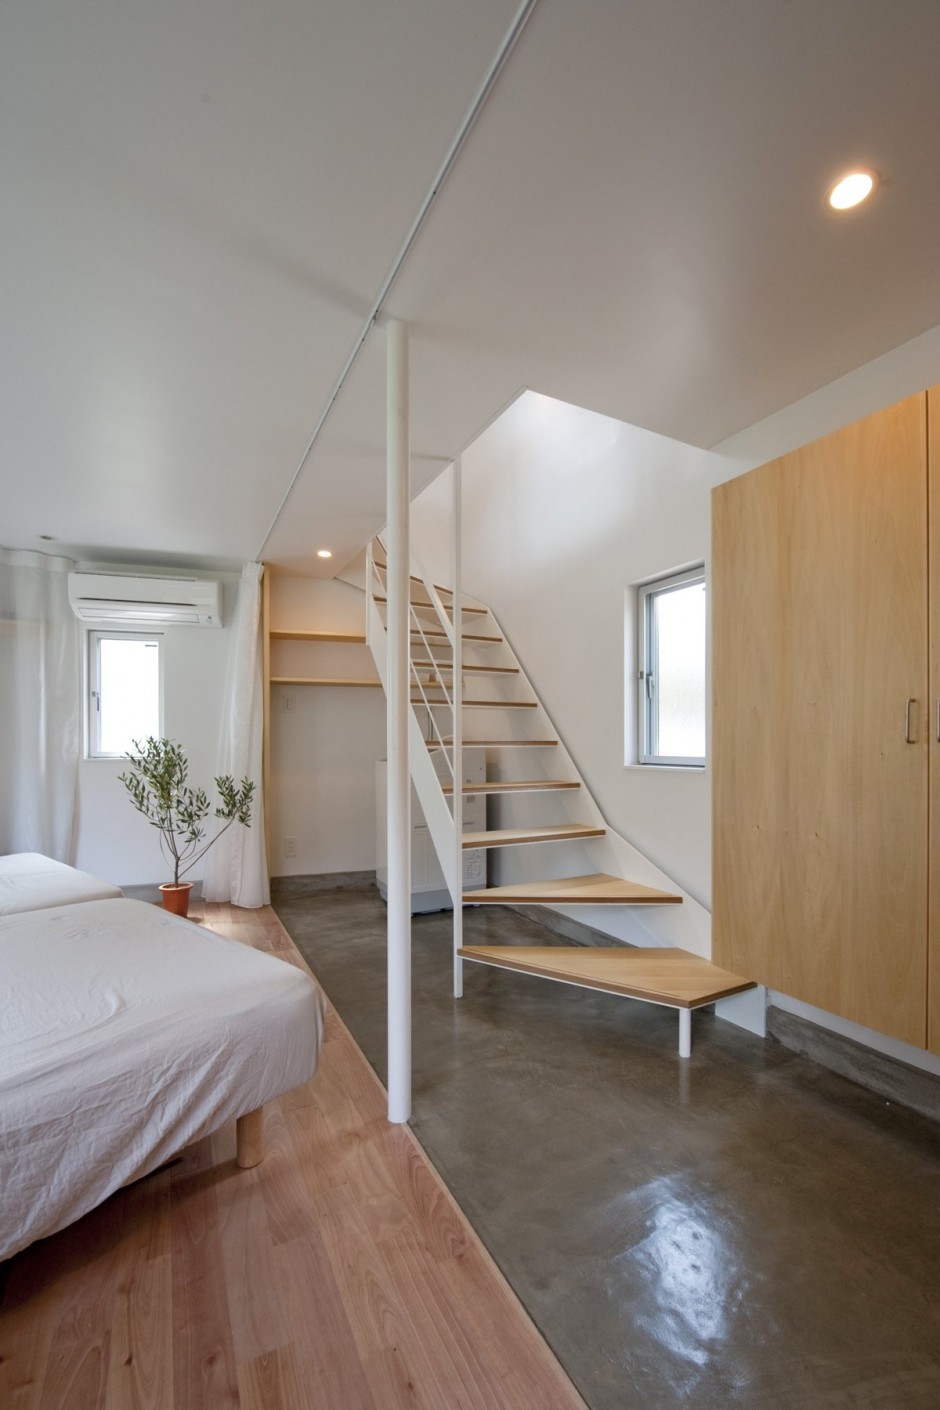 Japanese Small House Design by Muji Japanese Retail 